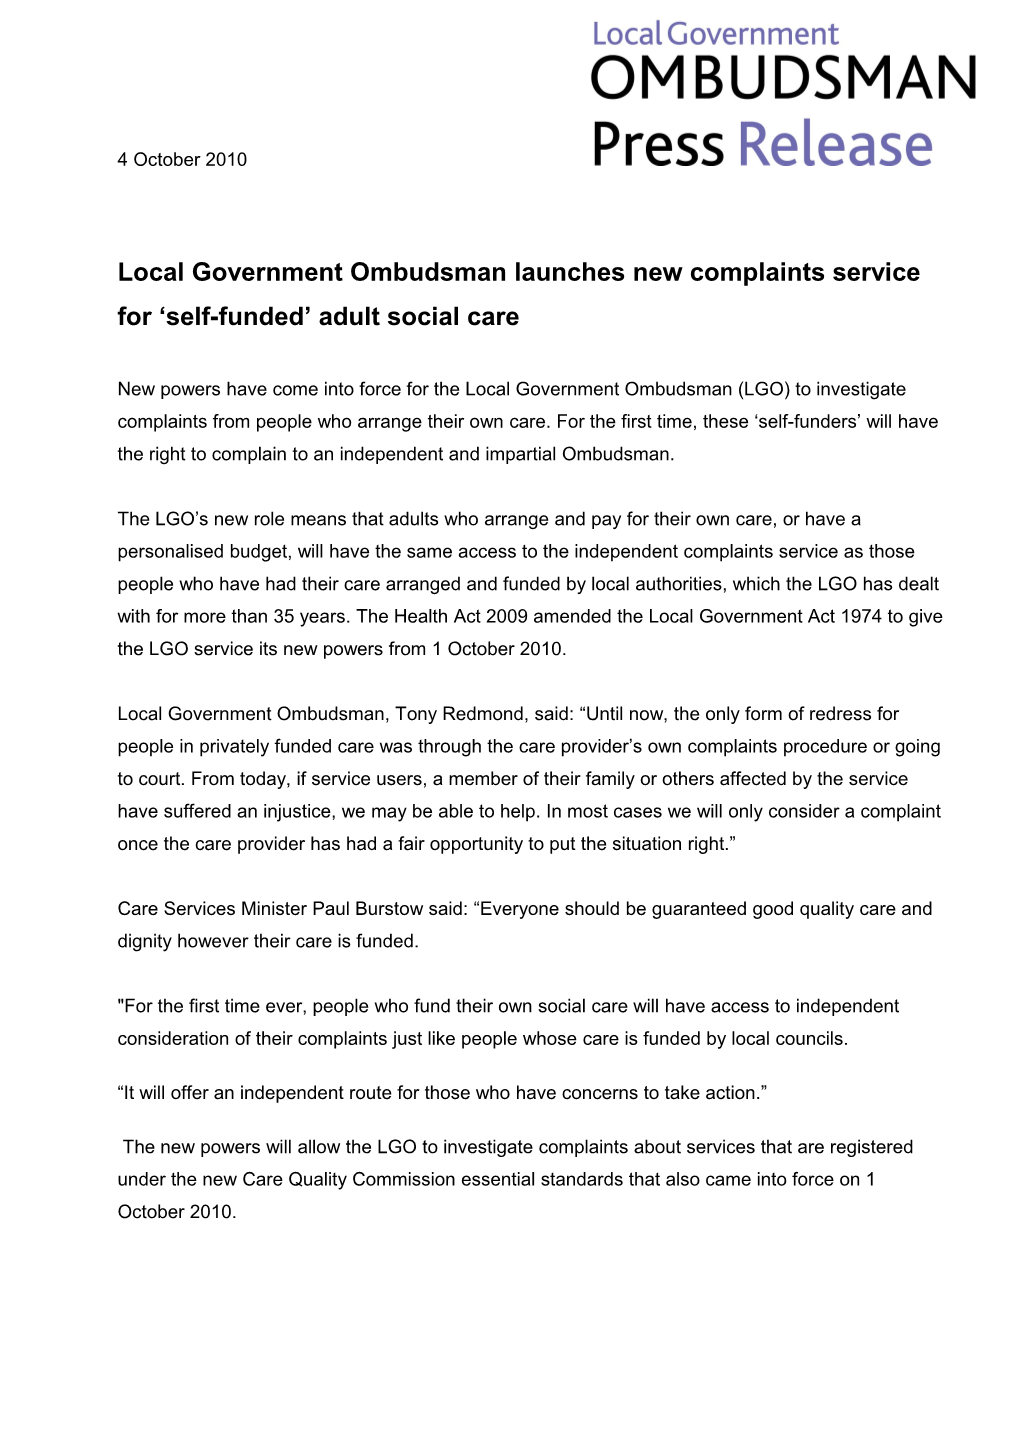 Local Government Ombudsman Launches New Complaints Service for Self-Funded Adult Social Care